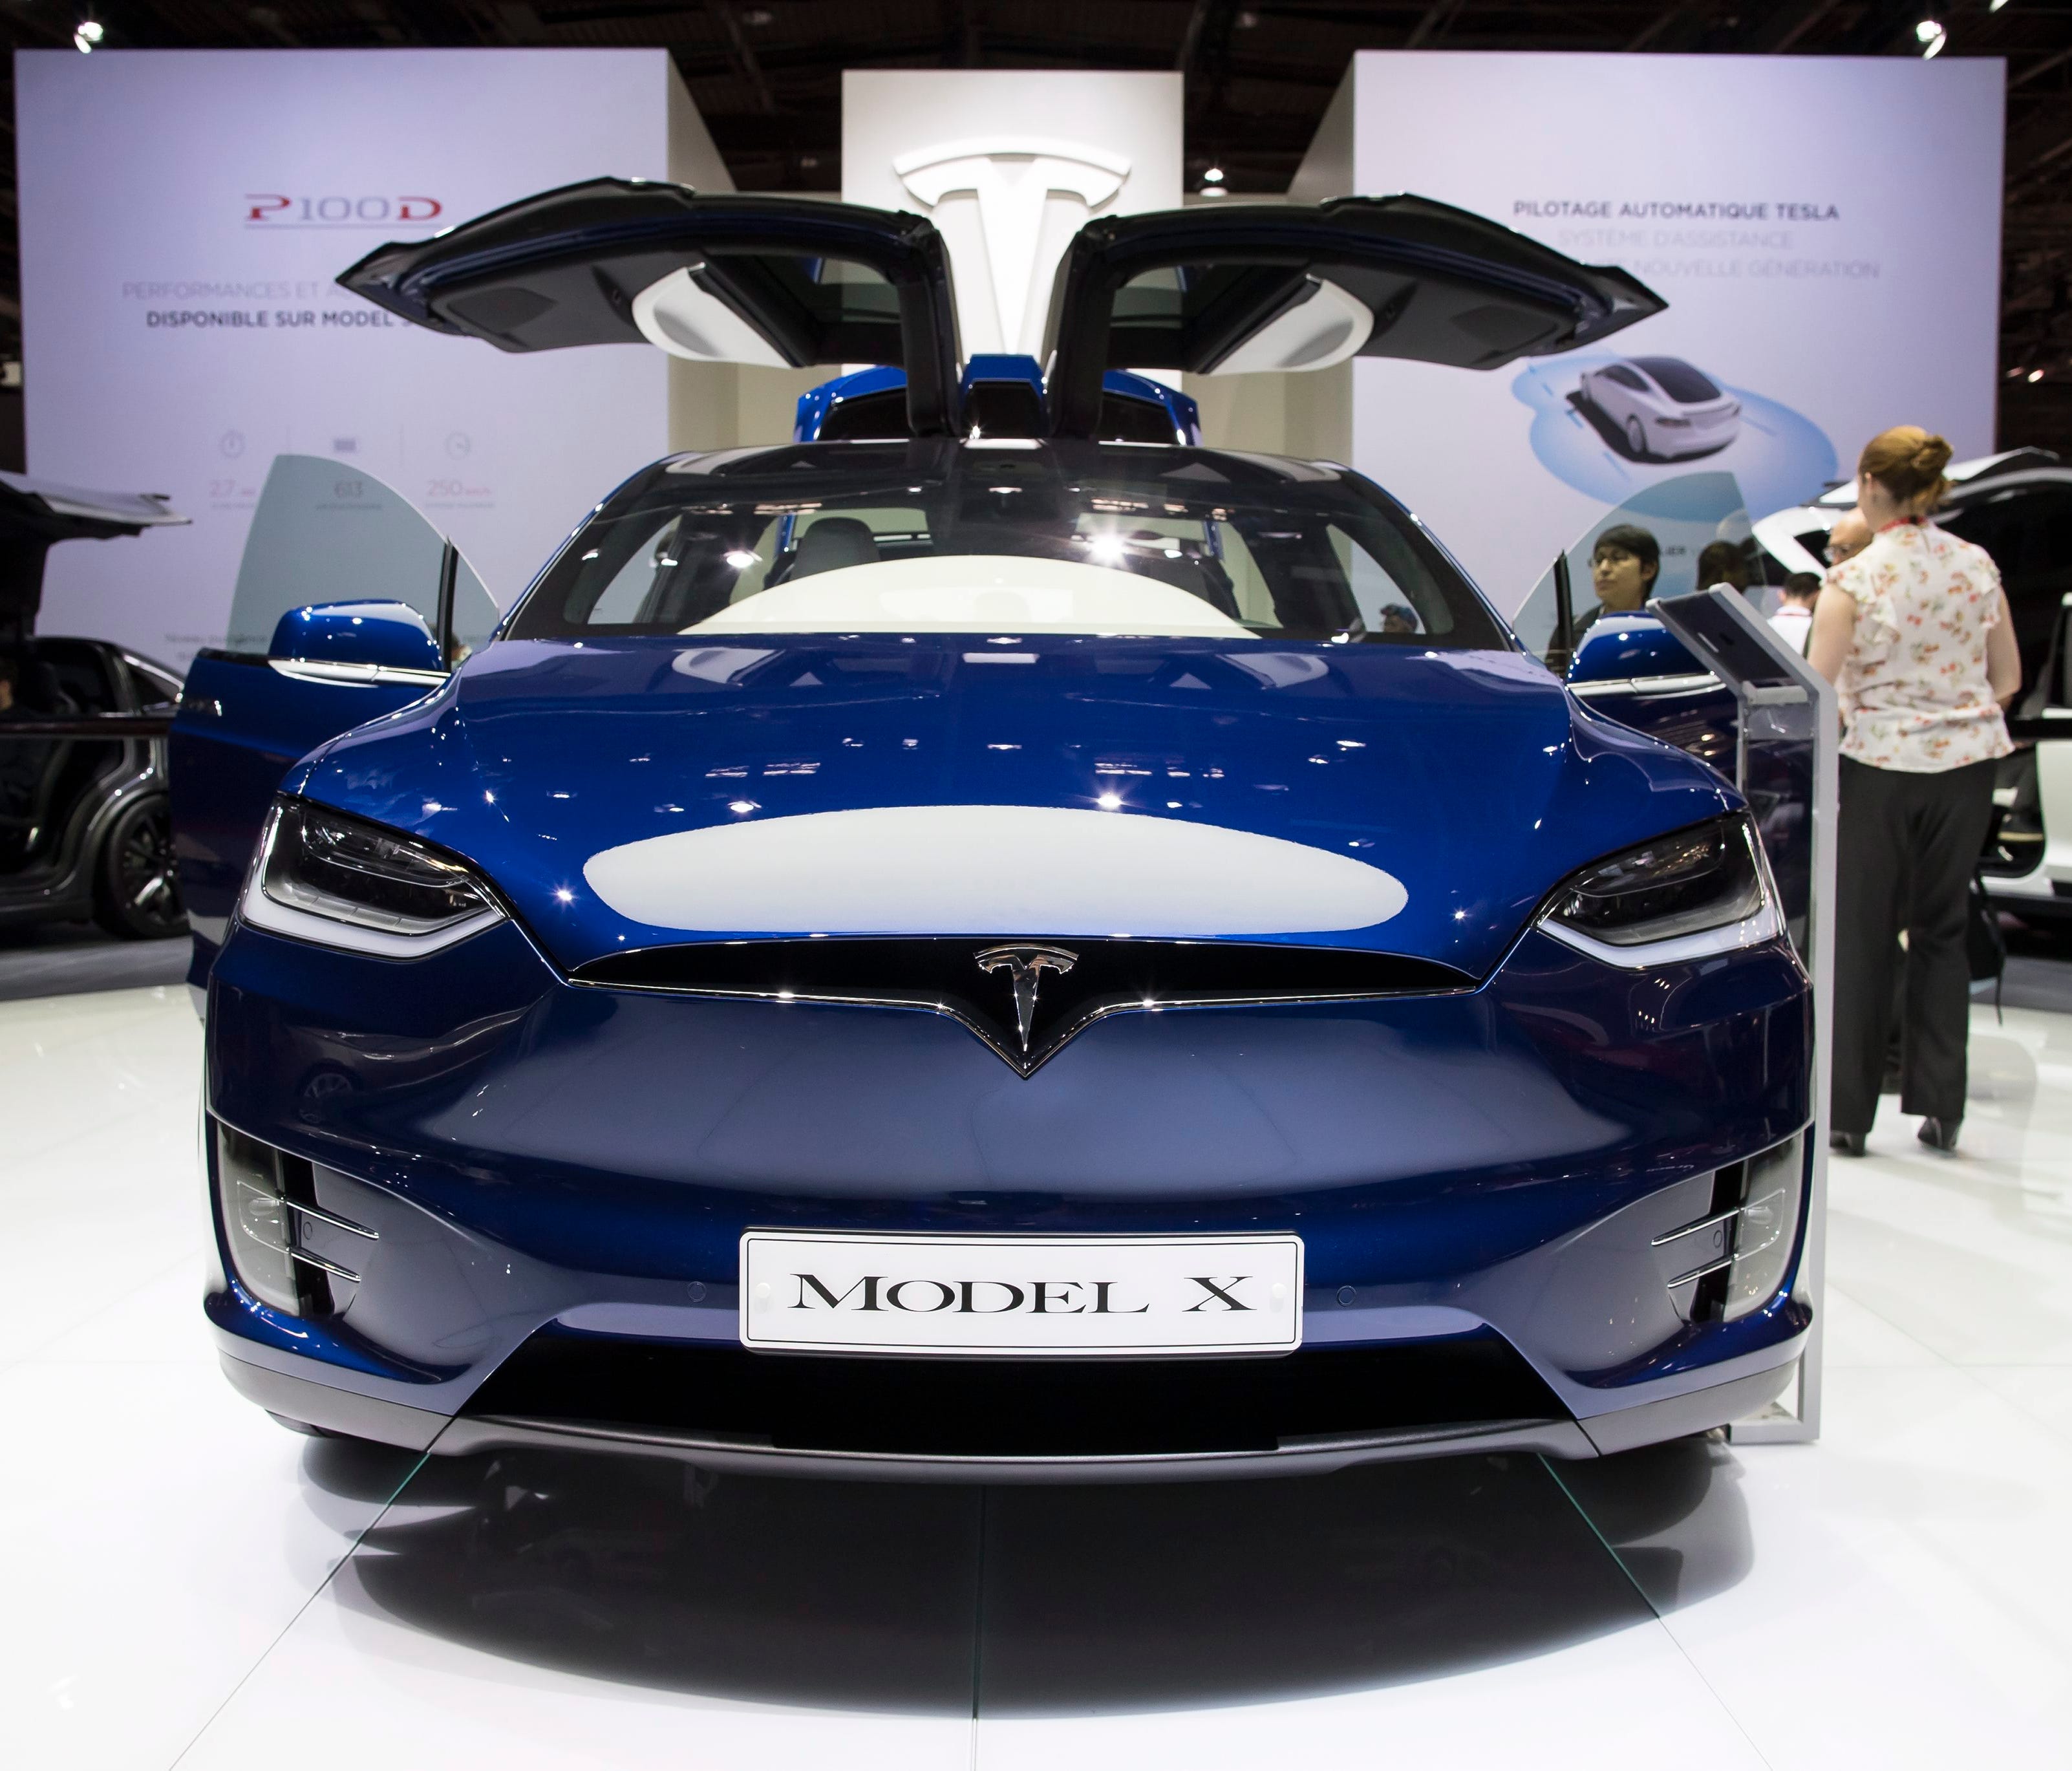 A Tesla Model X is displayed at the Paris Motor Show in Paris on Sept. 30, 2016. The base model has a 237 mile range and starts at $79,500, according to Tesla.